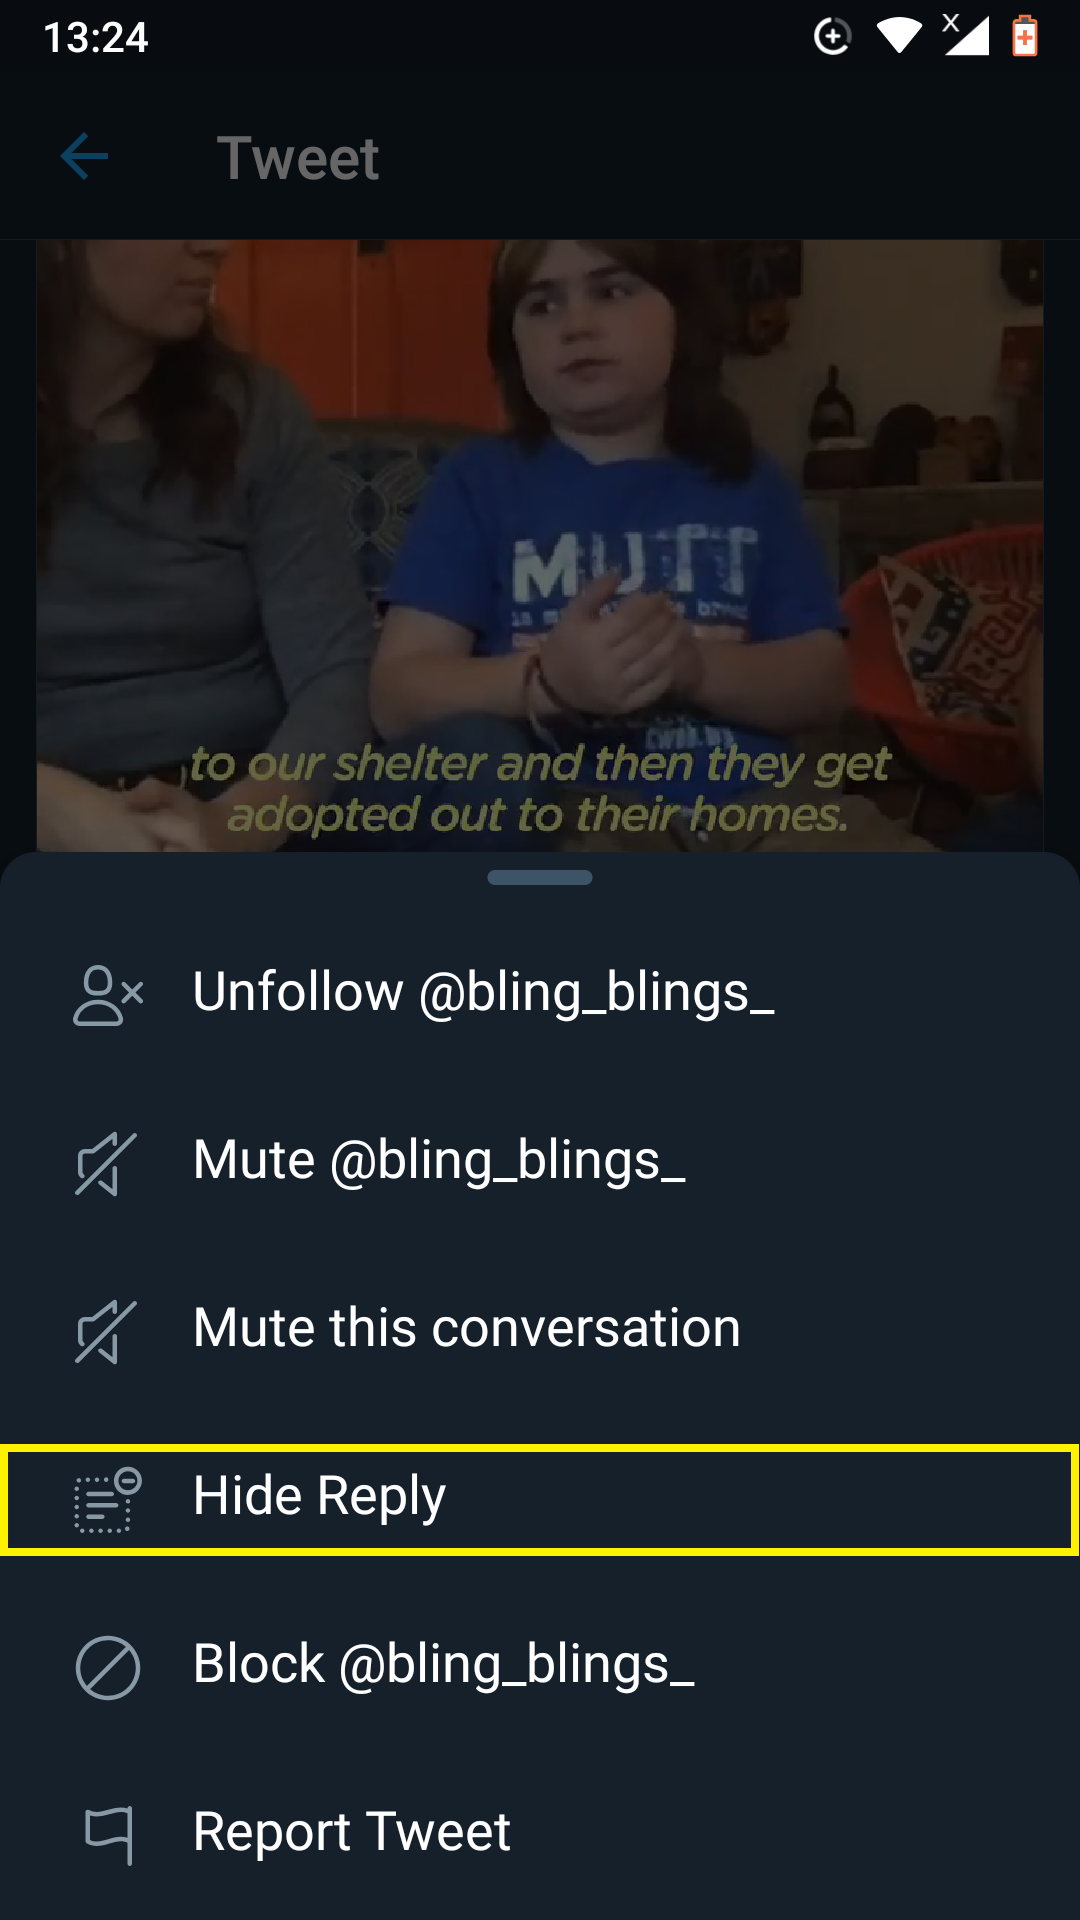 Learn how to hide and unhide replies to tweets with latest feature (Twitter 2019 update).